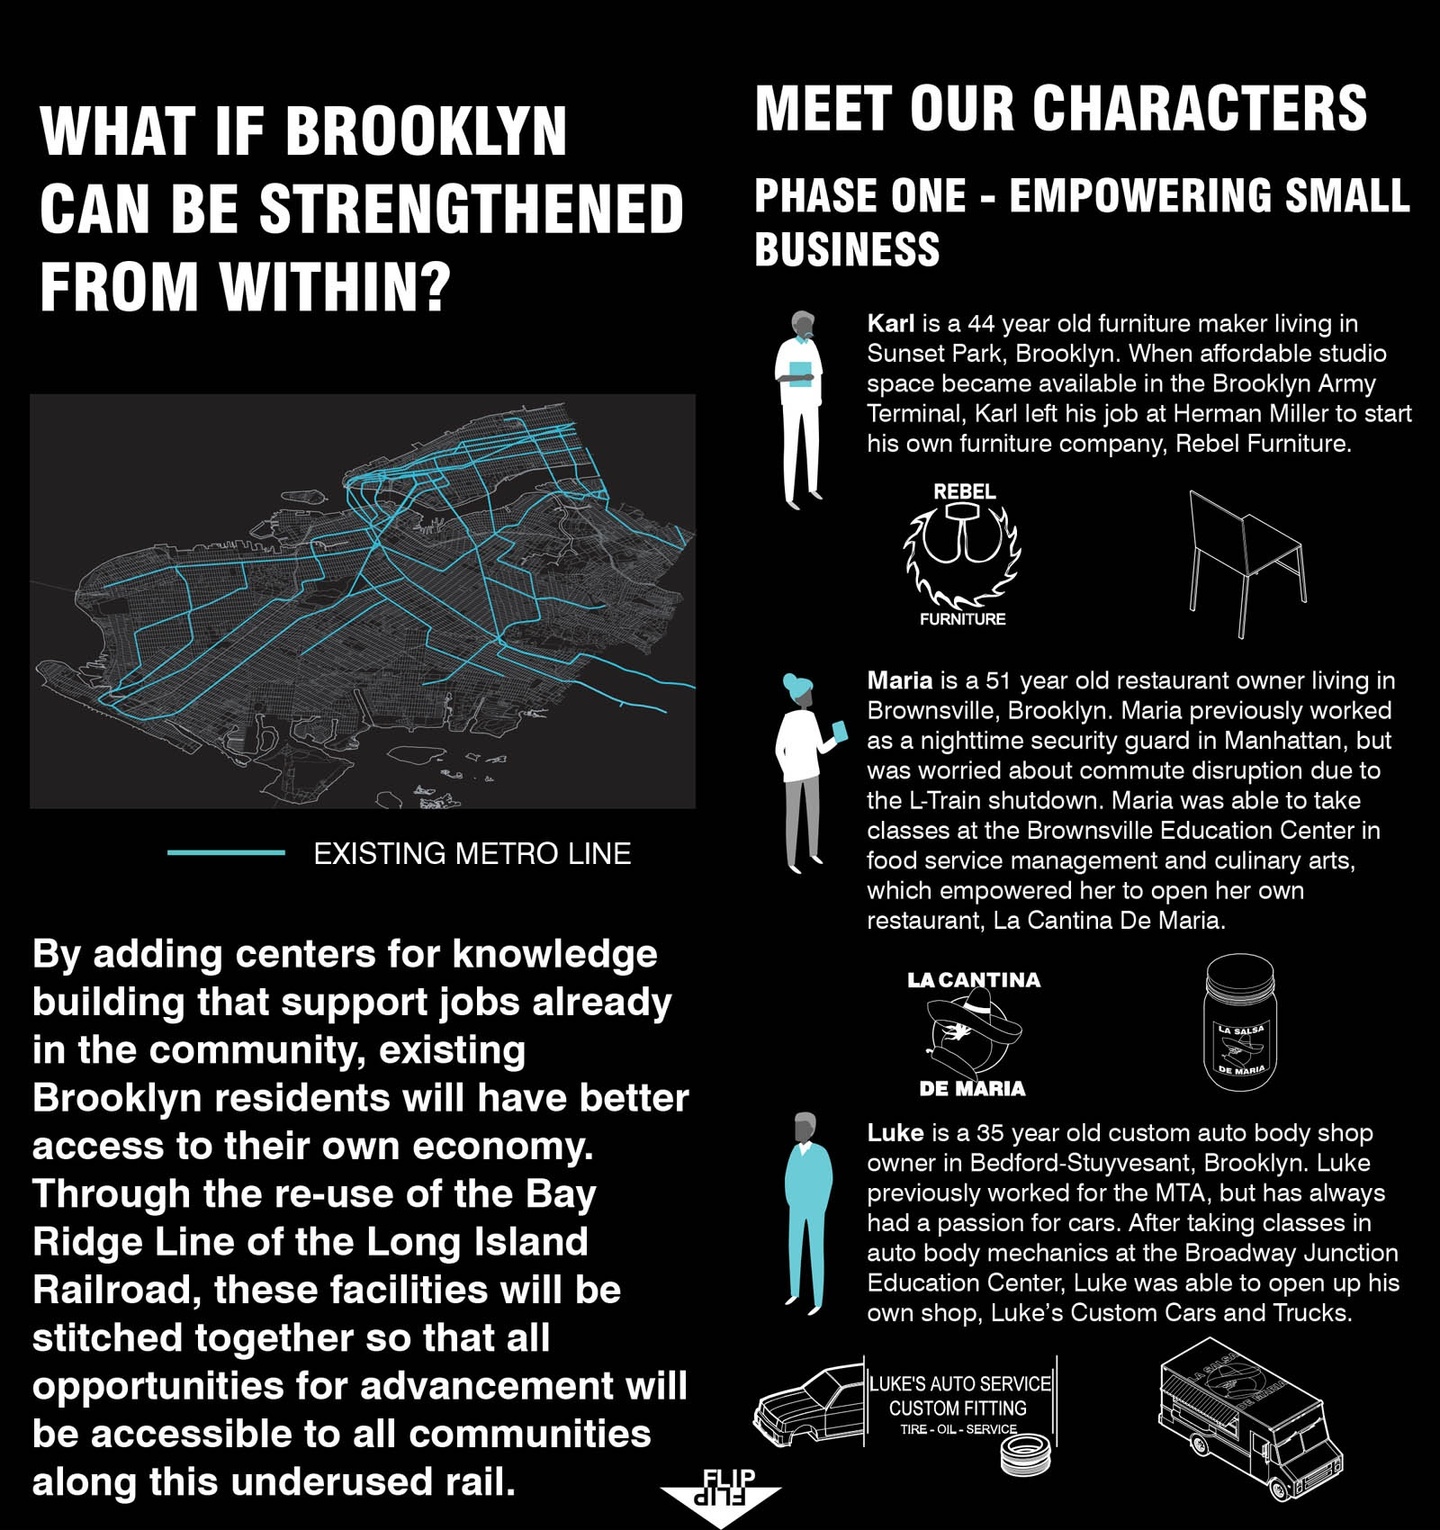 Infographic: What if Brooklyn can be strengthened from within? Including diagram of the metro line and a few key characters.